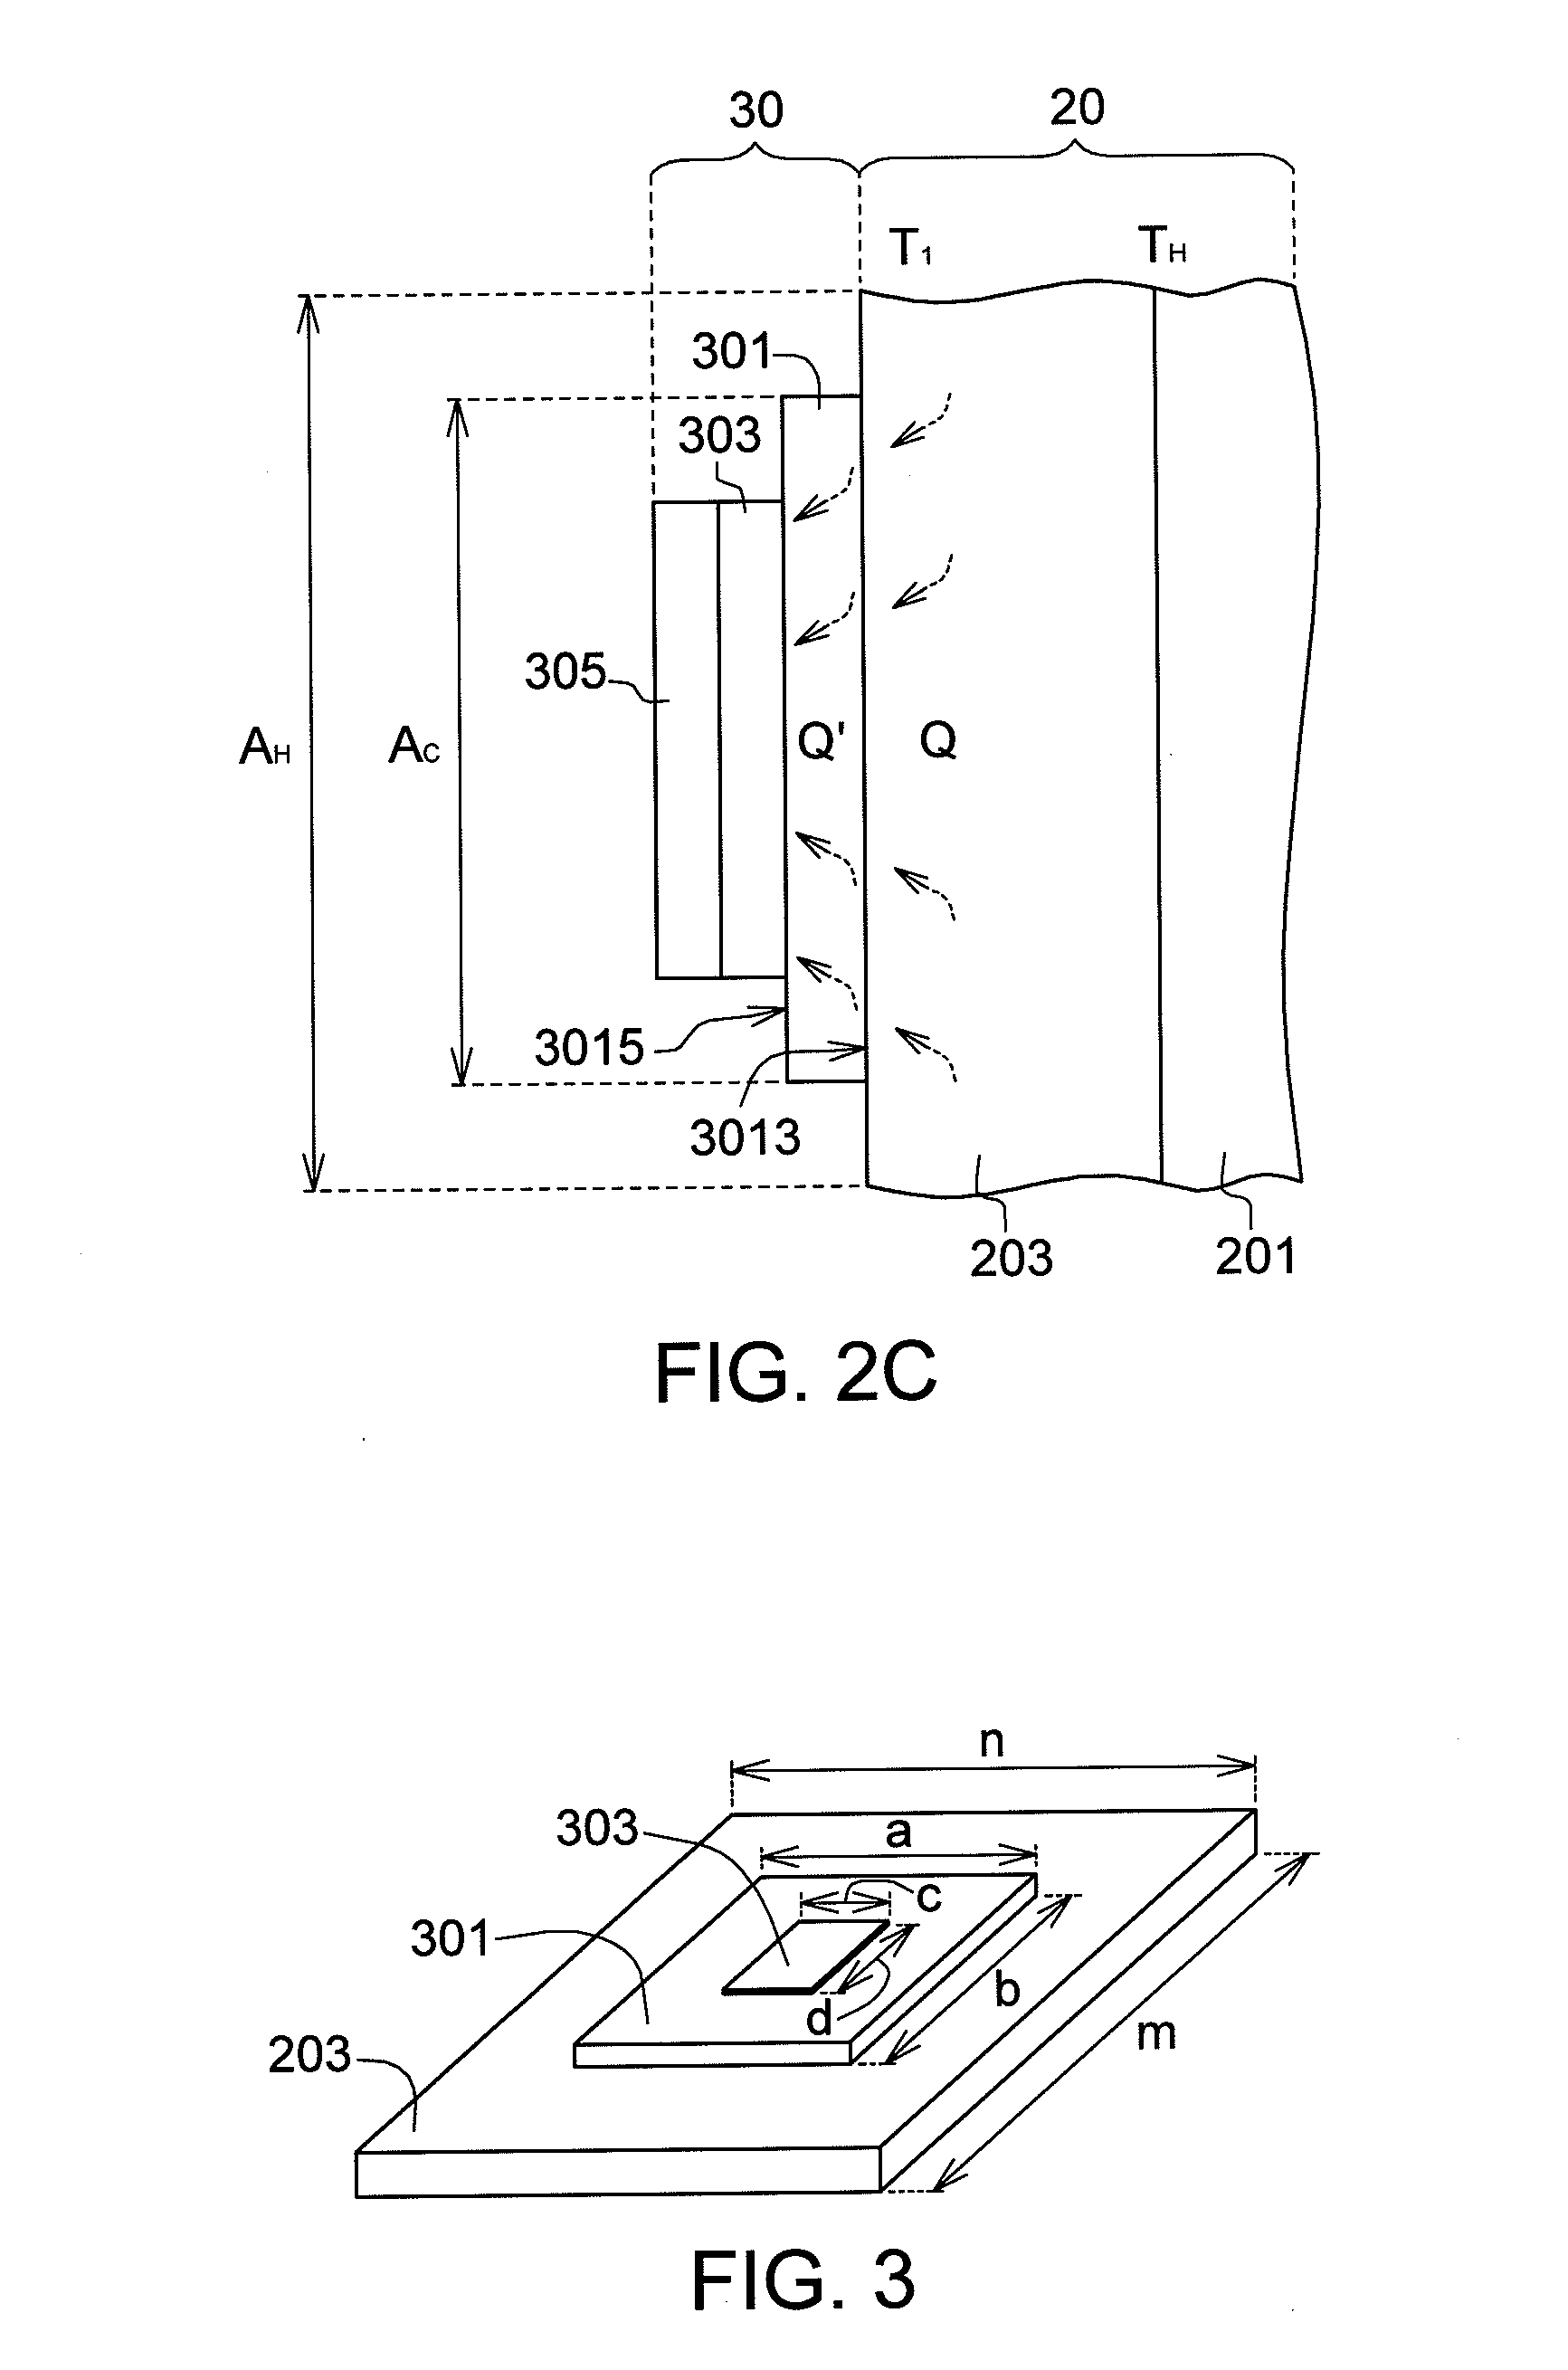 Thermoelectric generator apparatus with high thermoelectric conversion efficiency